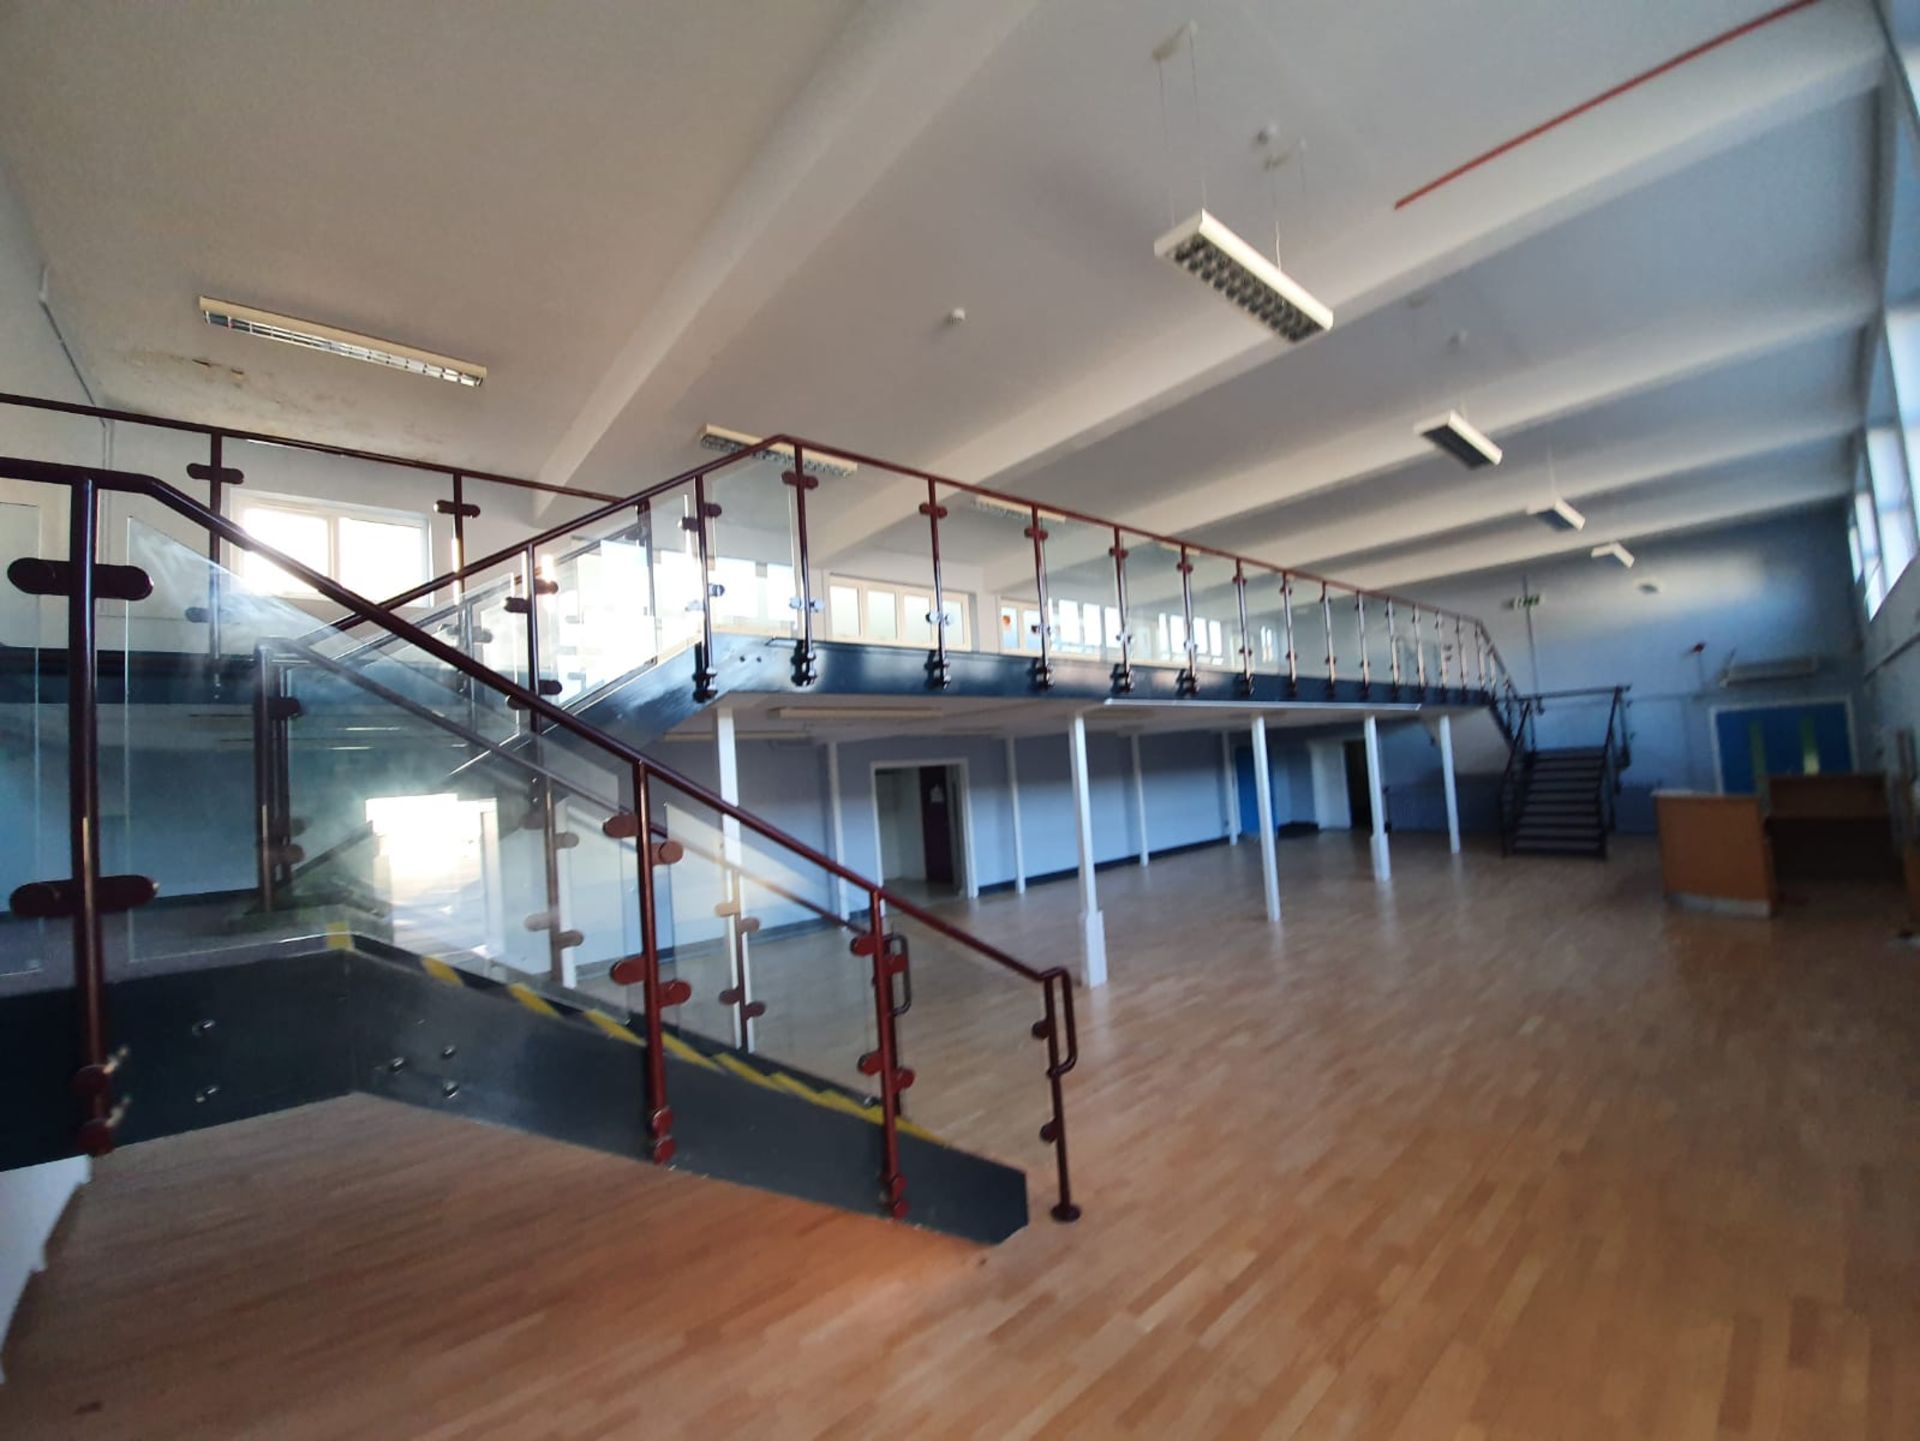 1 x Mezzanine Floor With Two Sets of Floating Stairs and Glazed Safety Panels With Hand Rails - From - Image 10 of 18